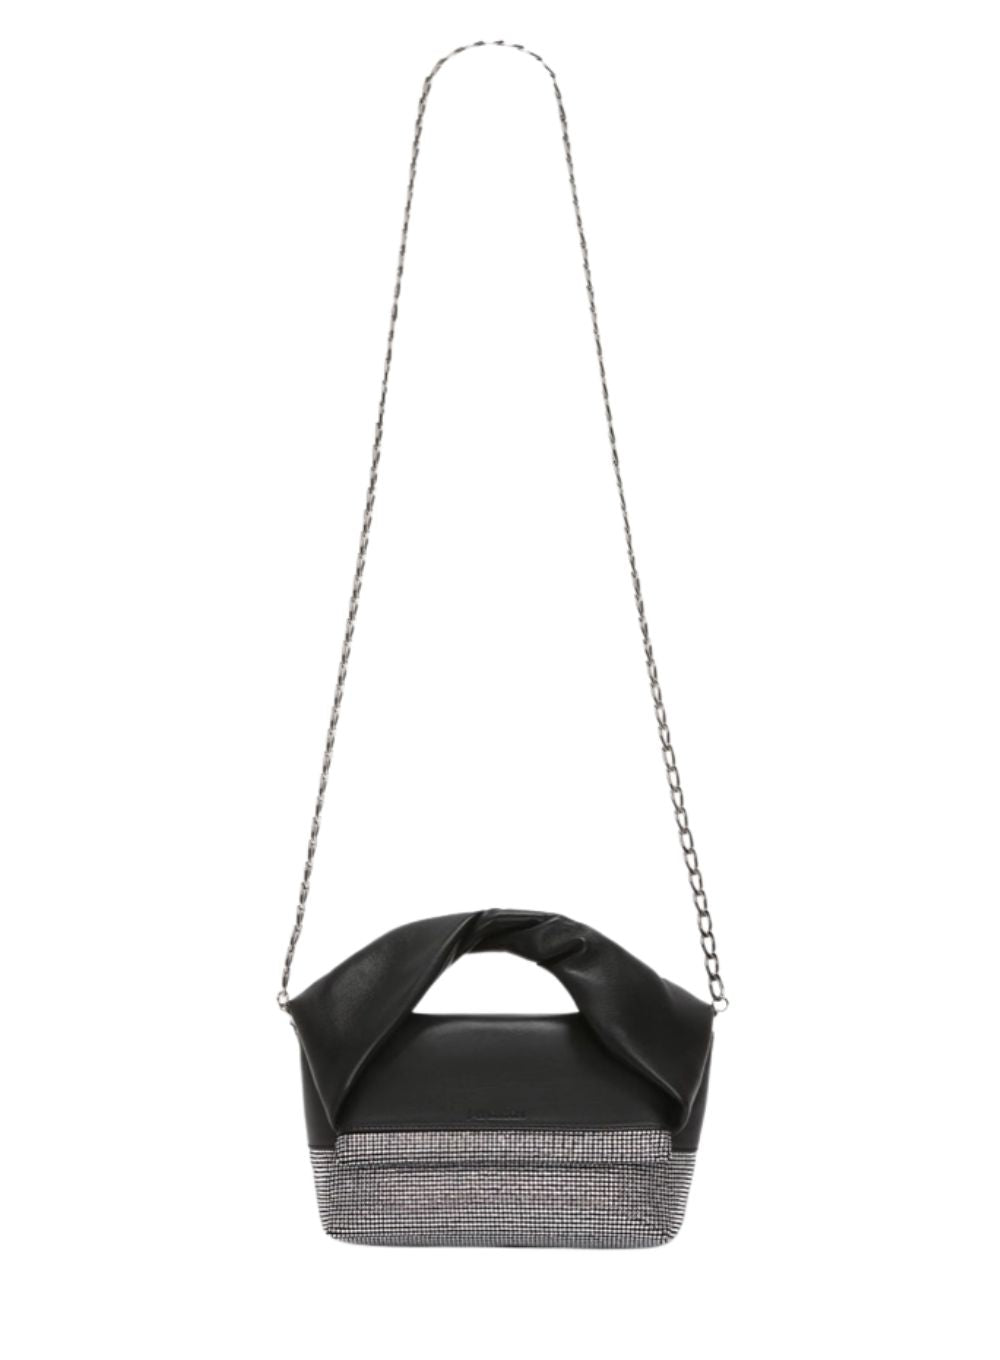 J.W. ANDERSON | Small Twister Bag With Crystals